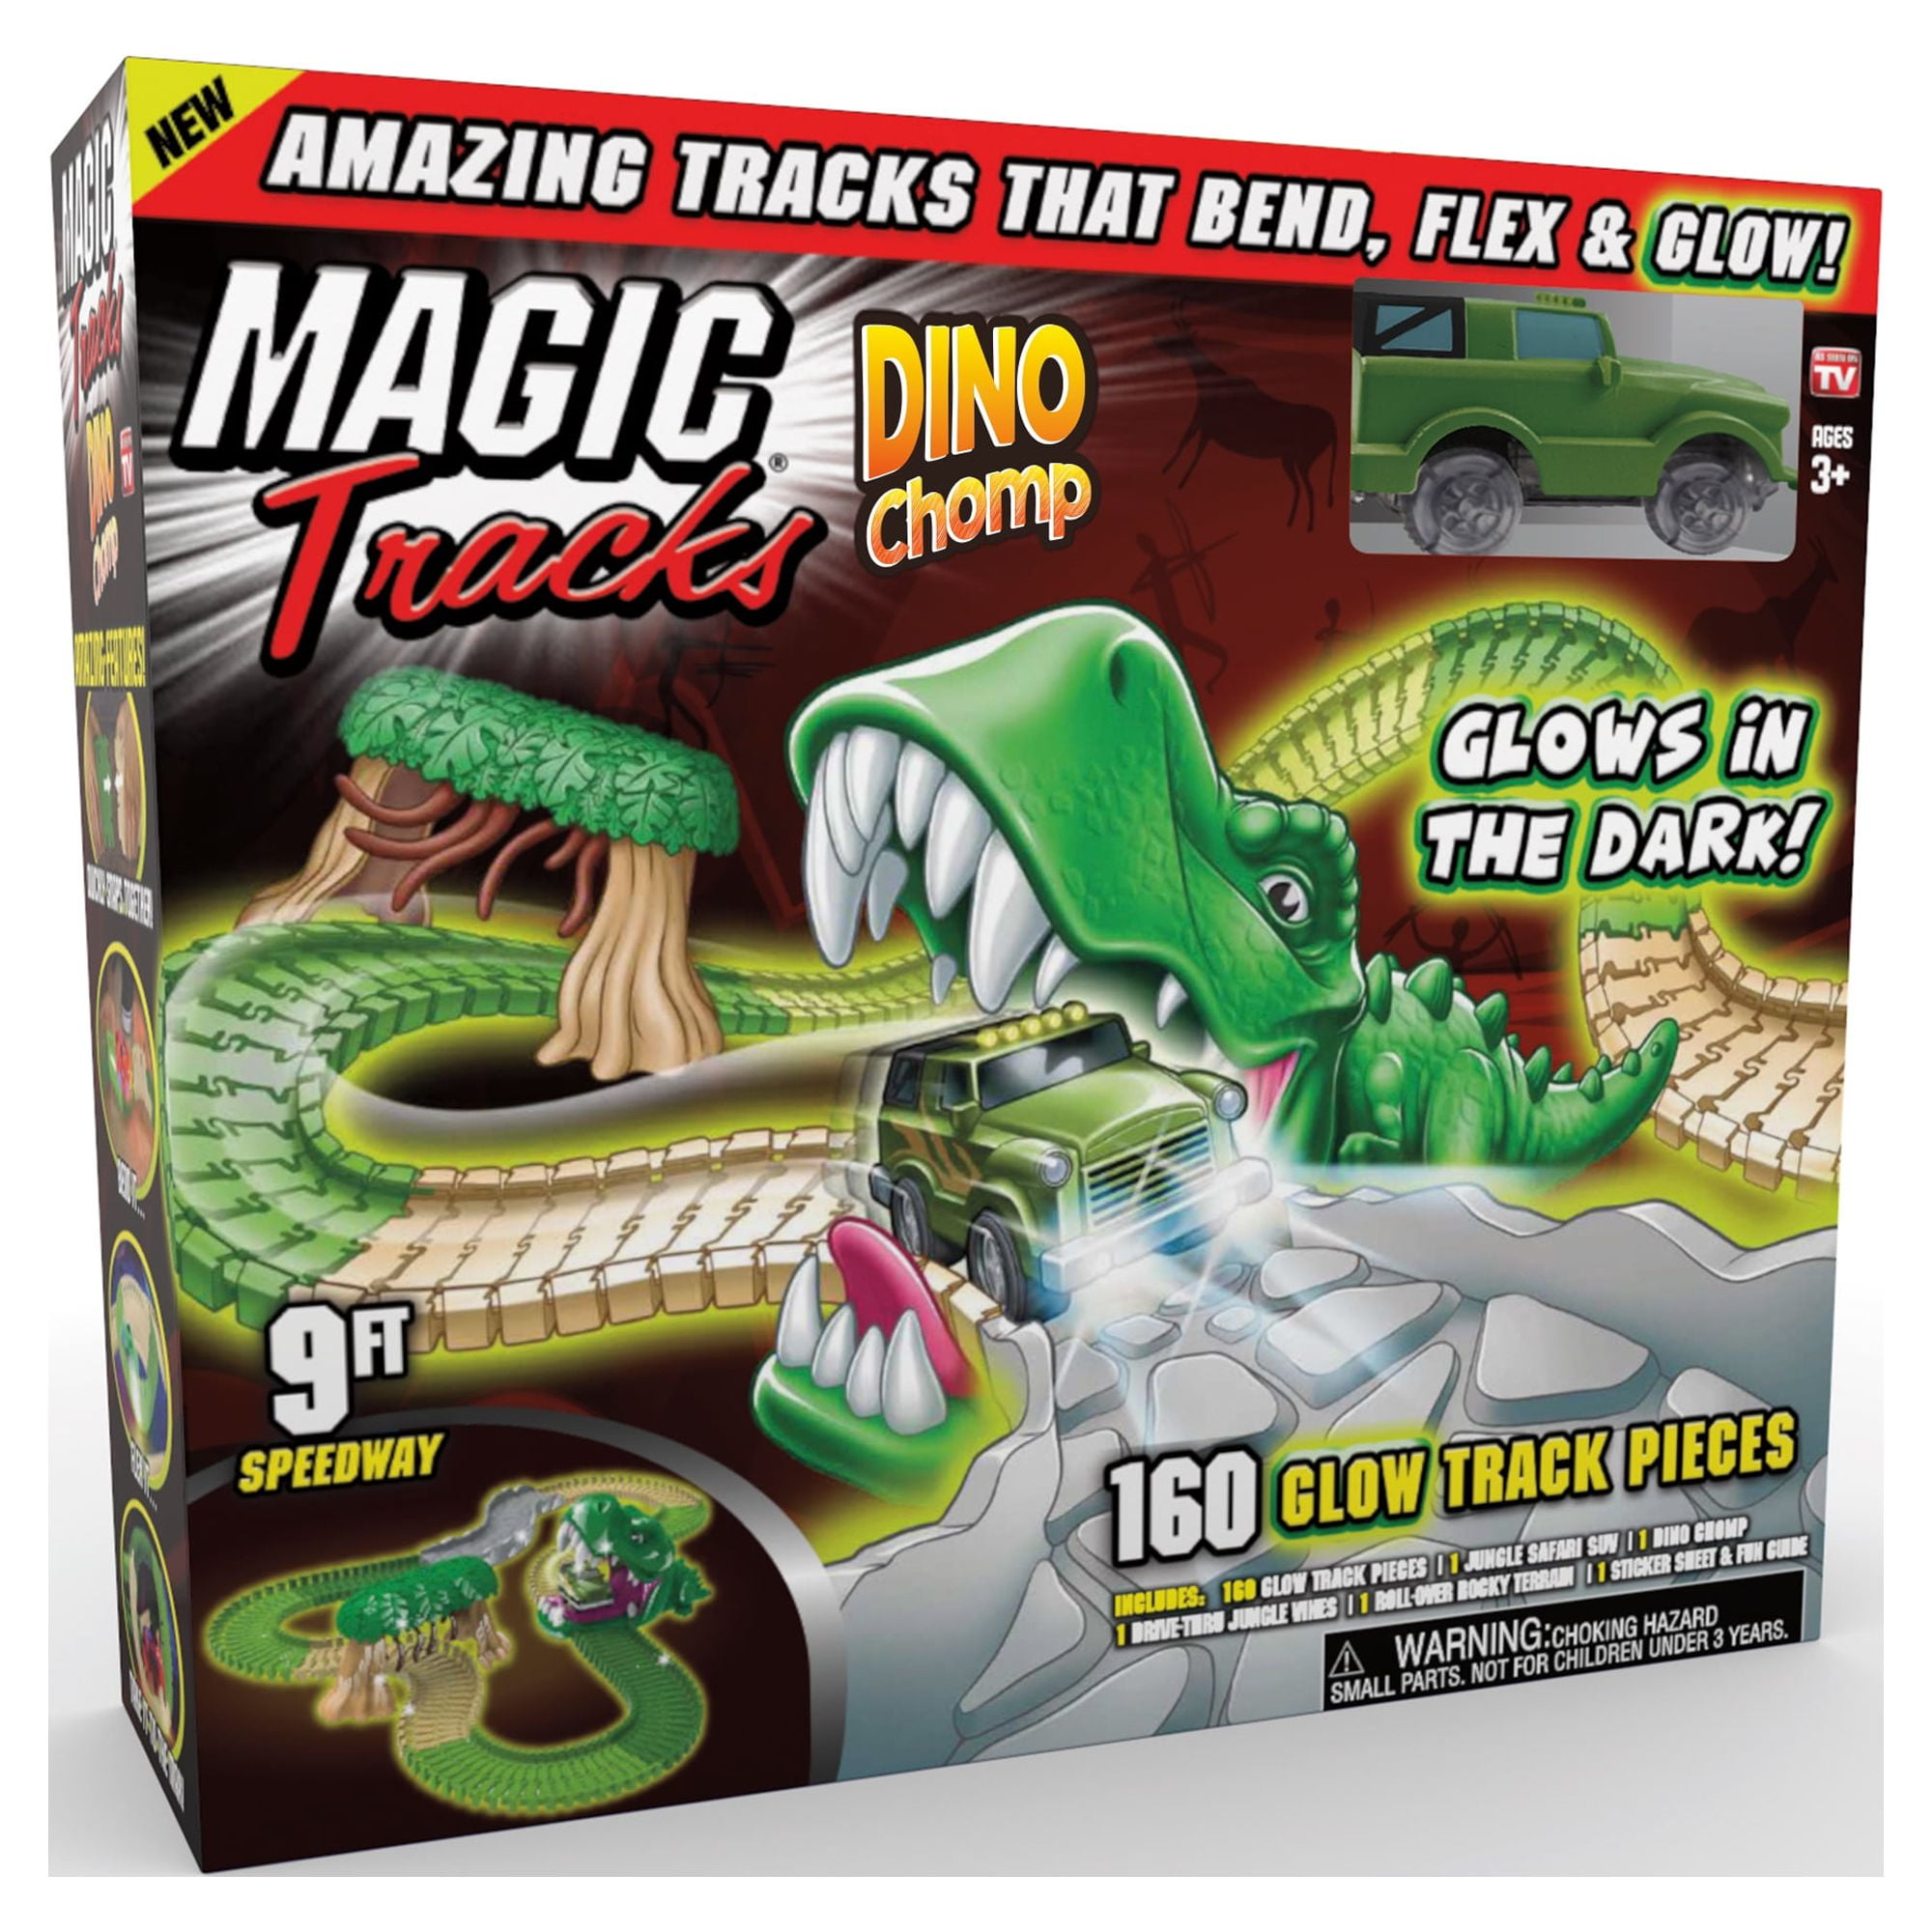 Magic Tracks Dino Chomp, Toy Car and 9ft Glow in the Dark Race Track, Age  Group 3-8